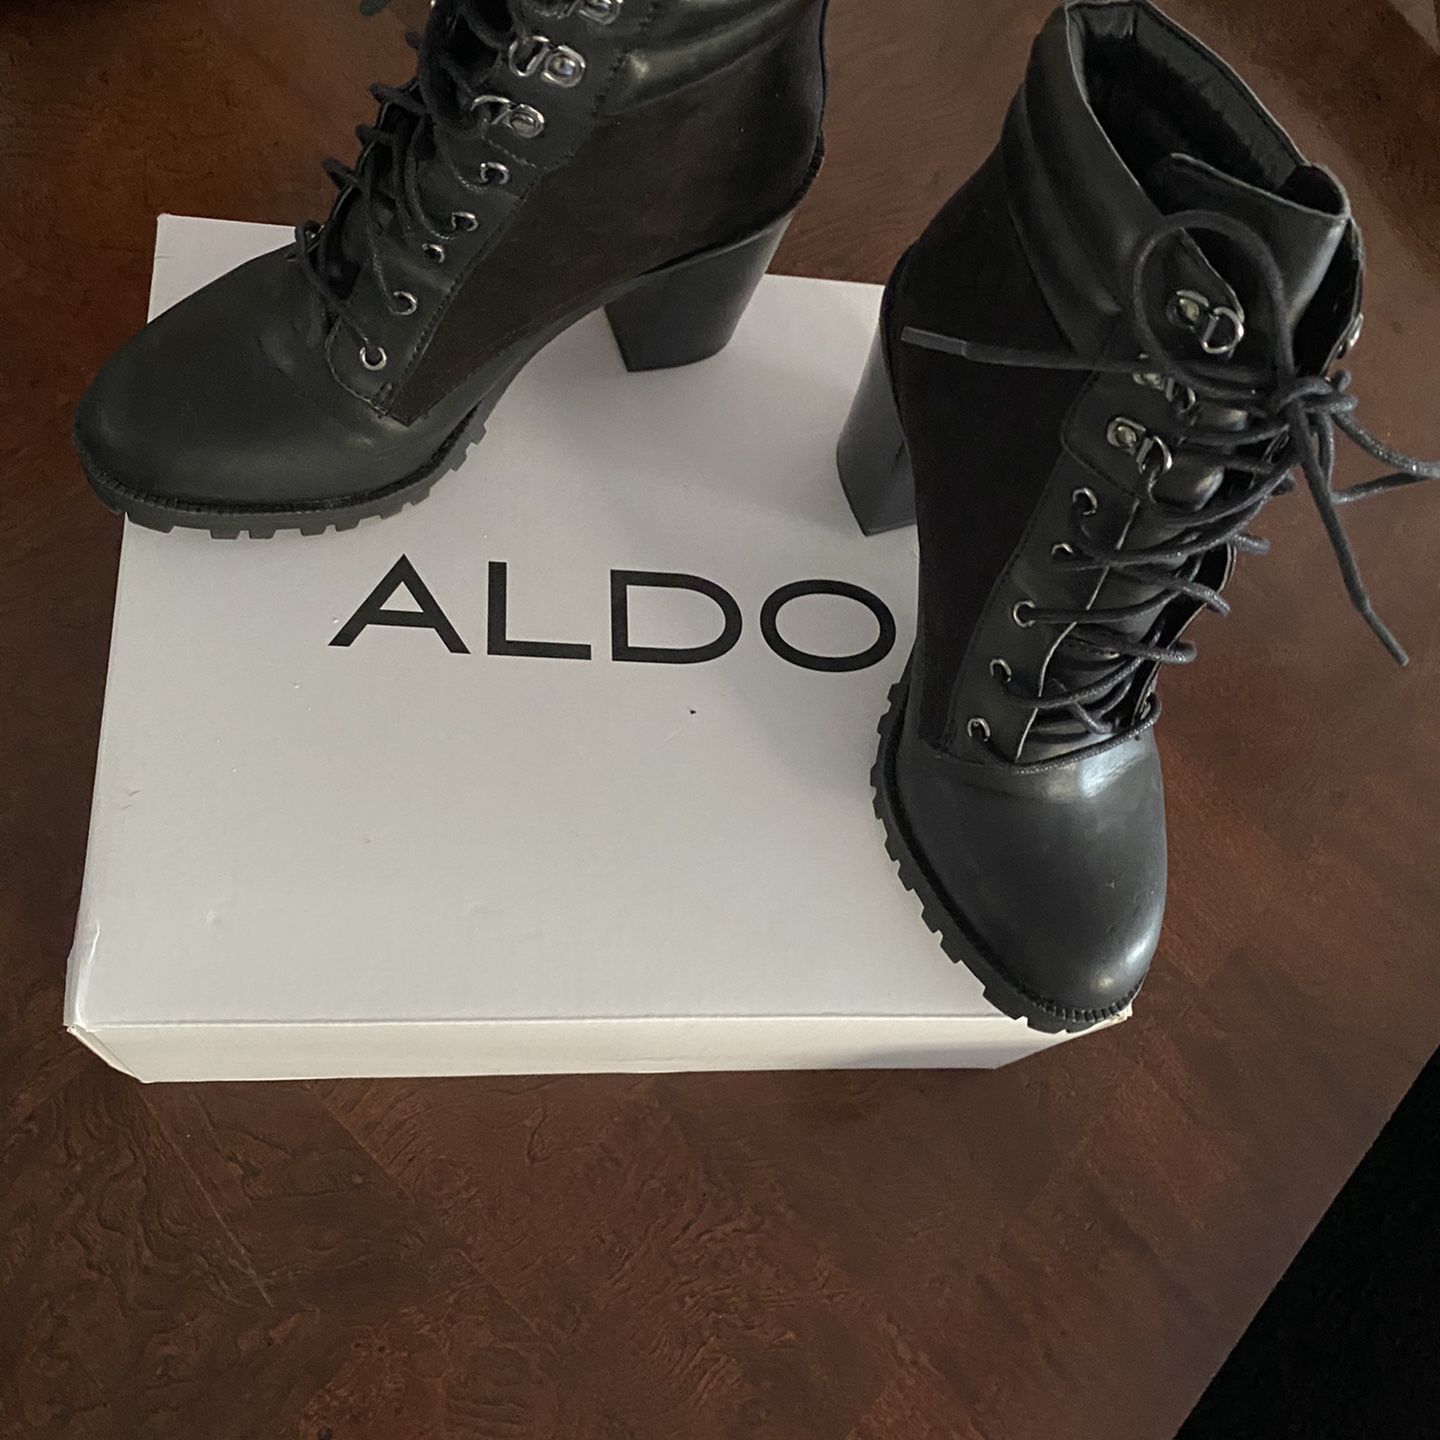 Aldo Black Ankle Boots - Never Used